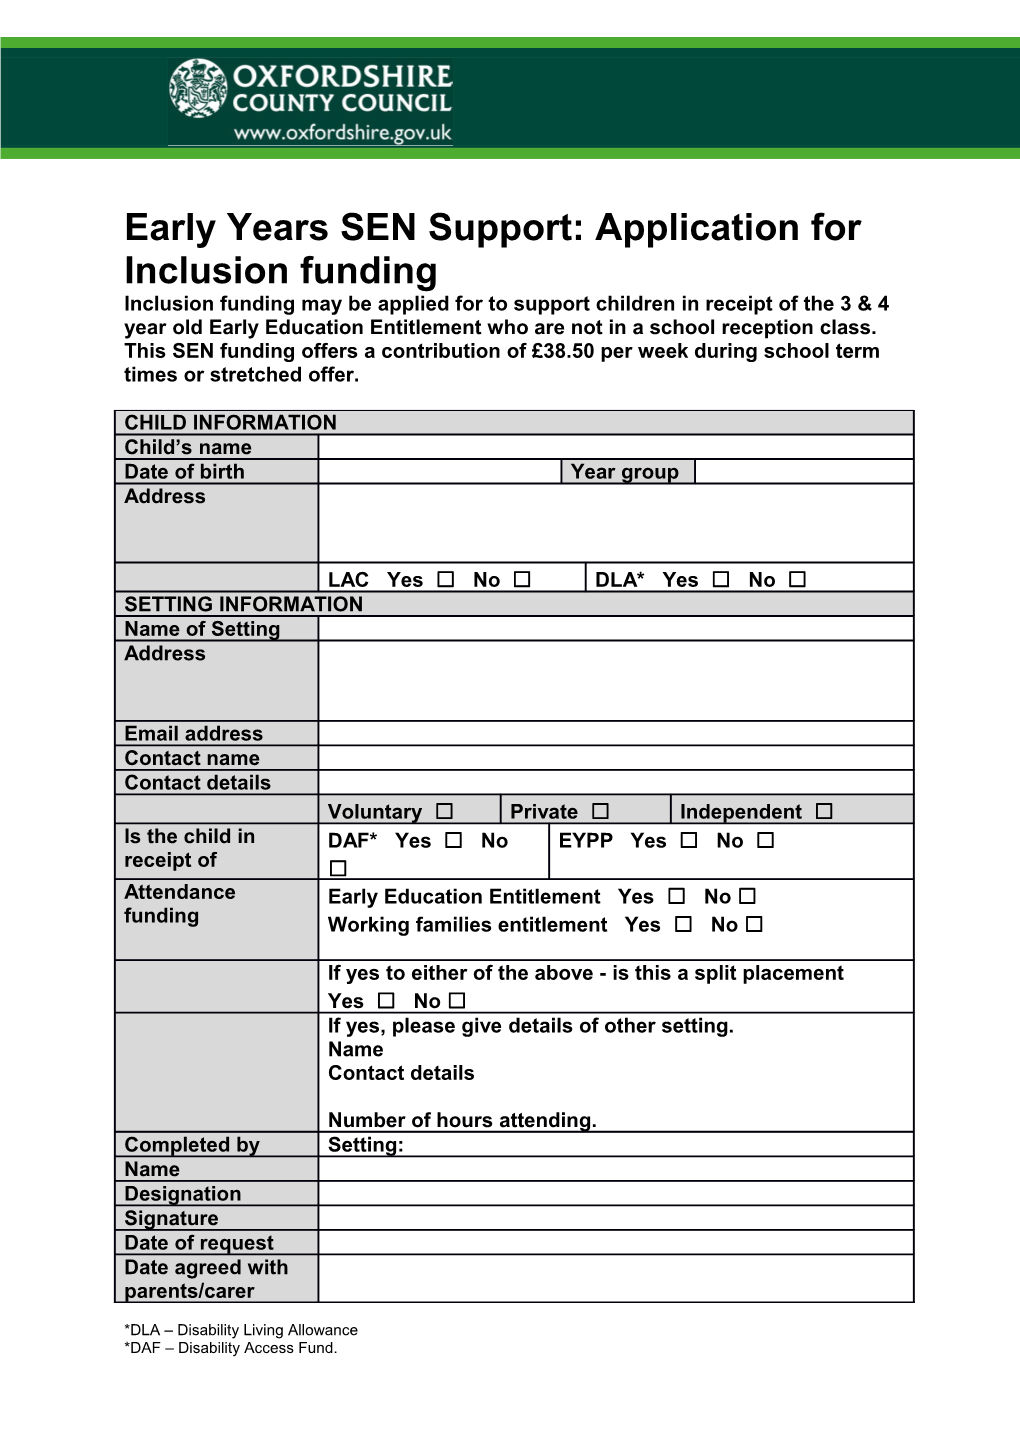 Early Years SEN Support: Application for Inclusionfunding